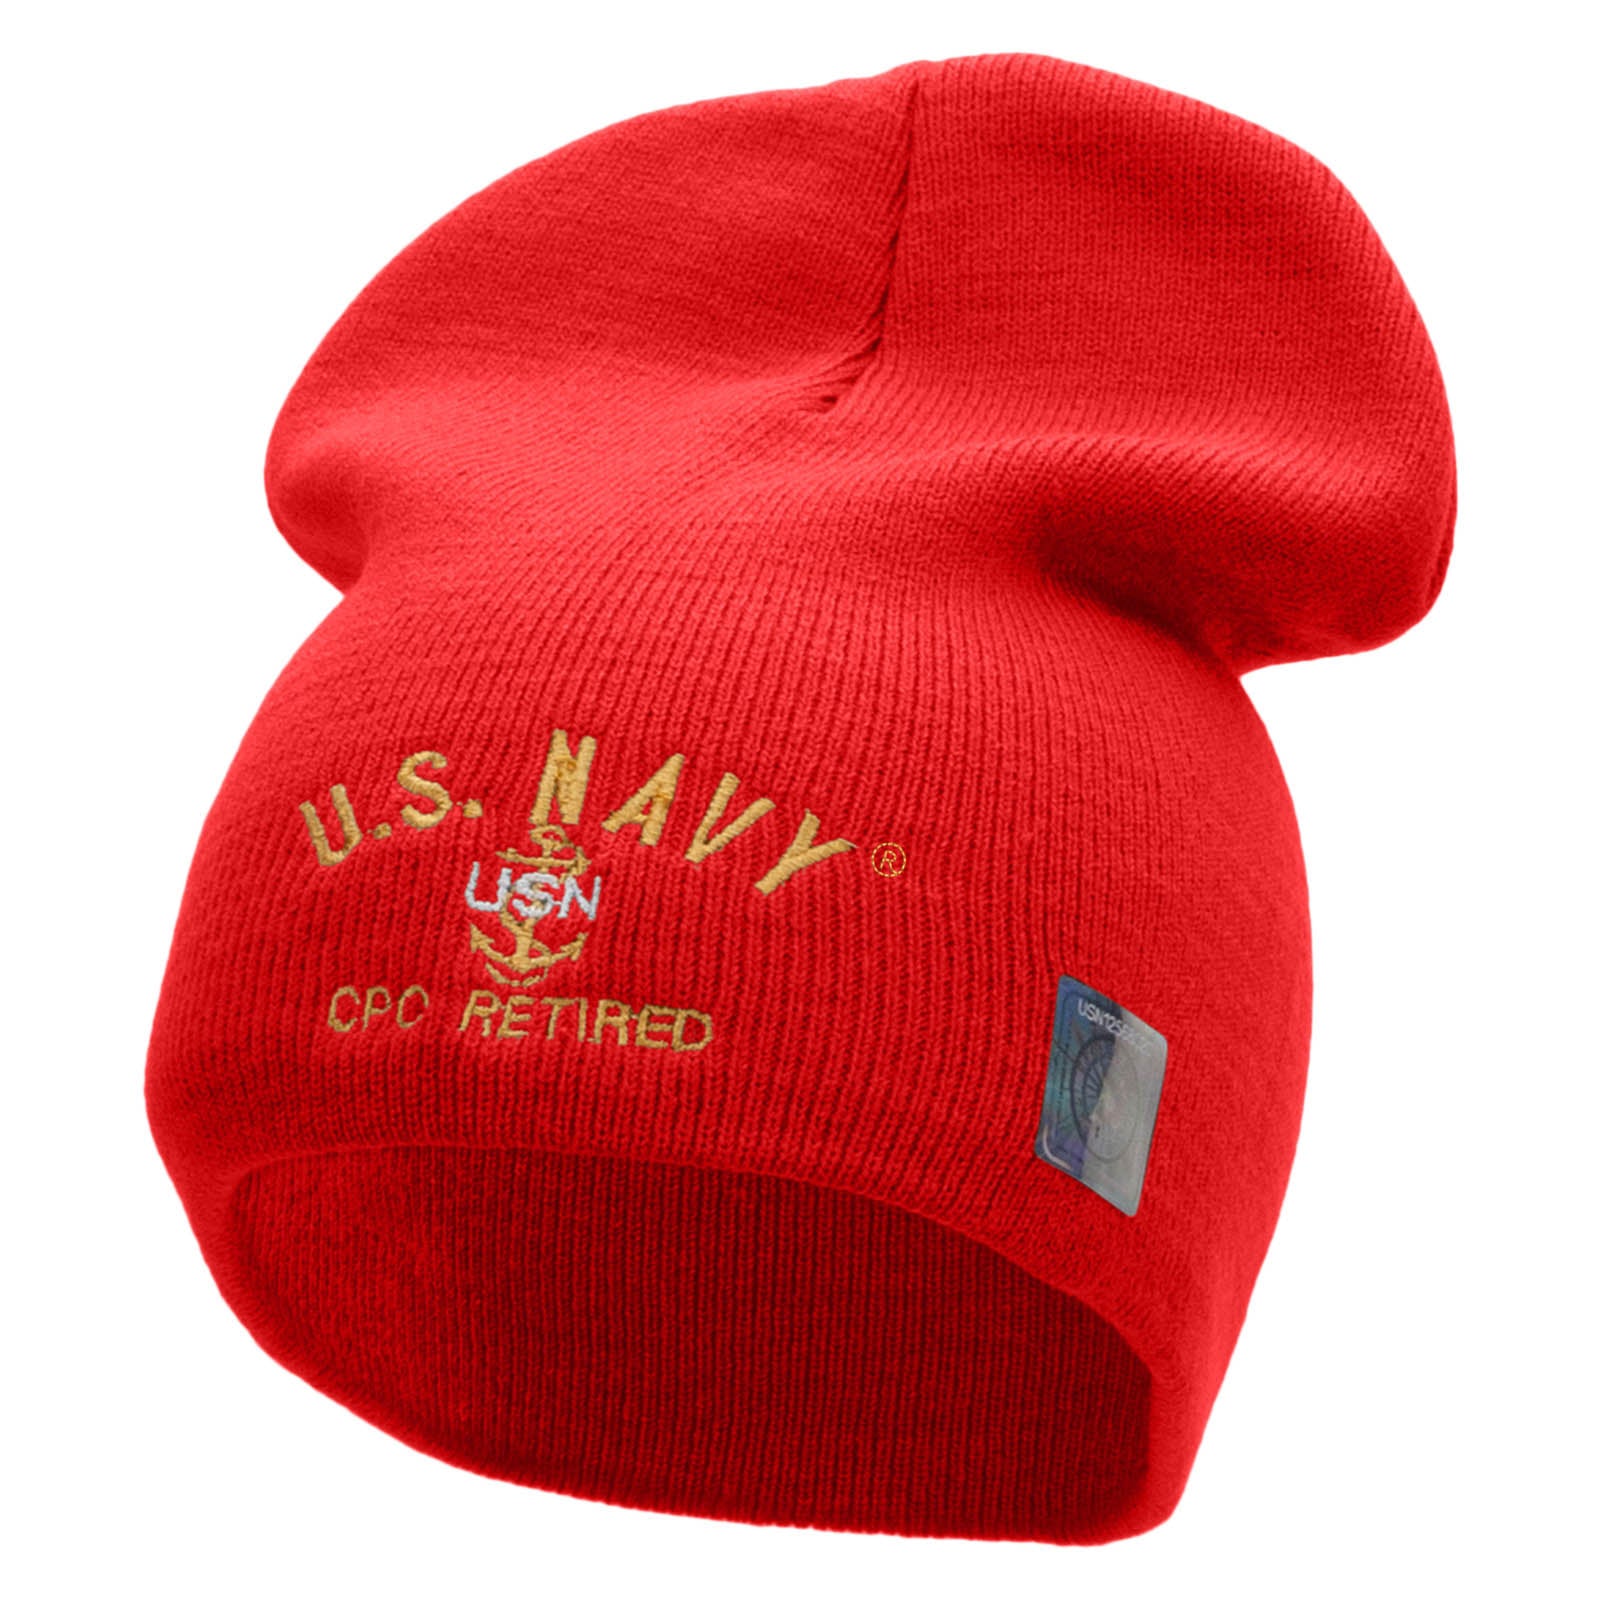 Licensed US Navy CPO Retired Embroidered Short Beanie Made in USA - Red OSFM